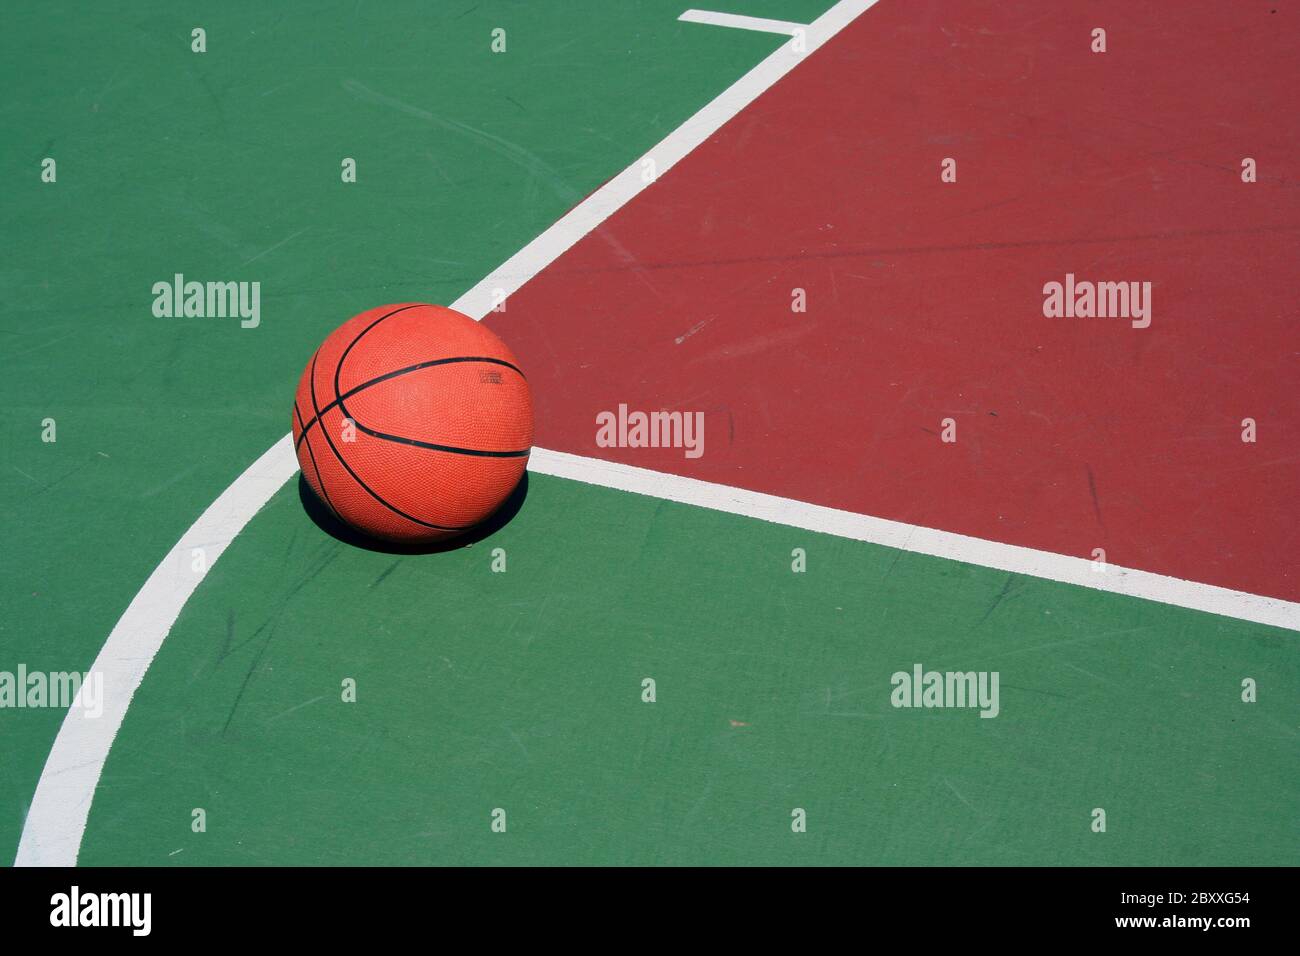 A Basketball at free throw line on red and green court Stock Photo